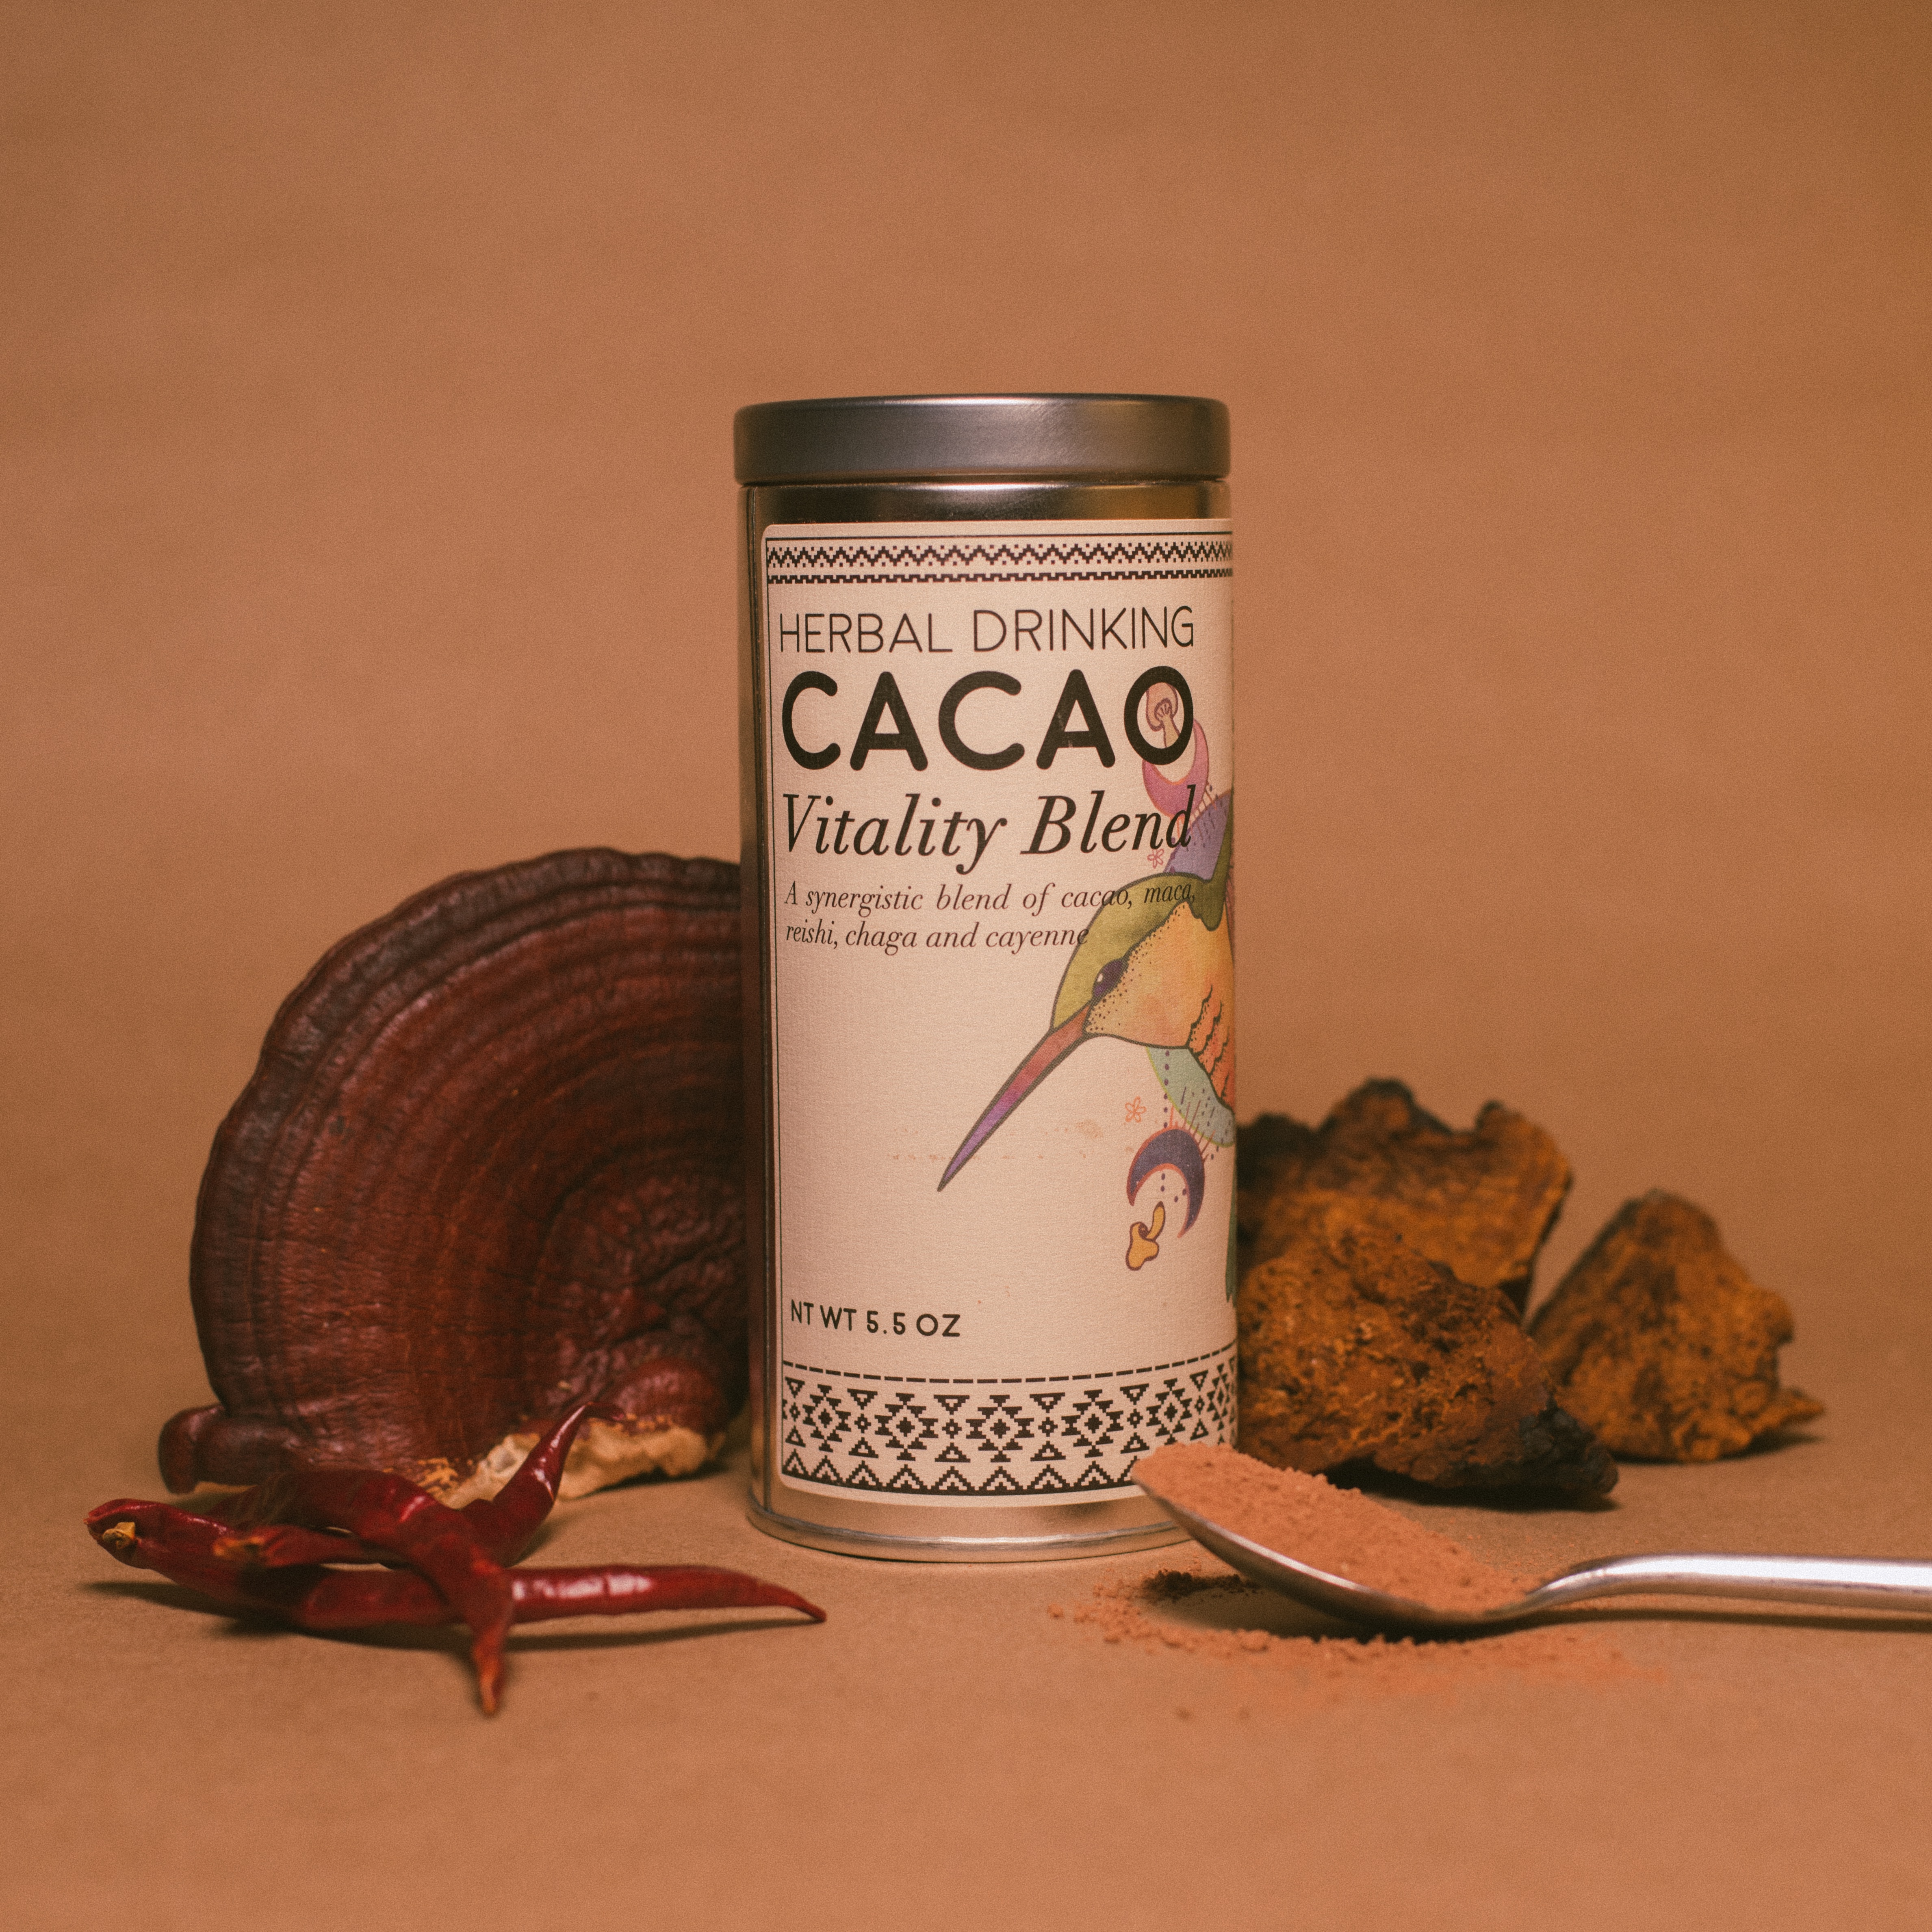 Ingredients for the Herbal Drinking Cacao blend.